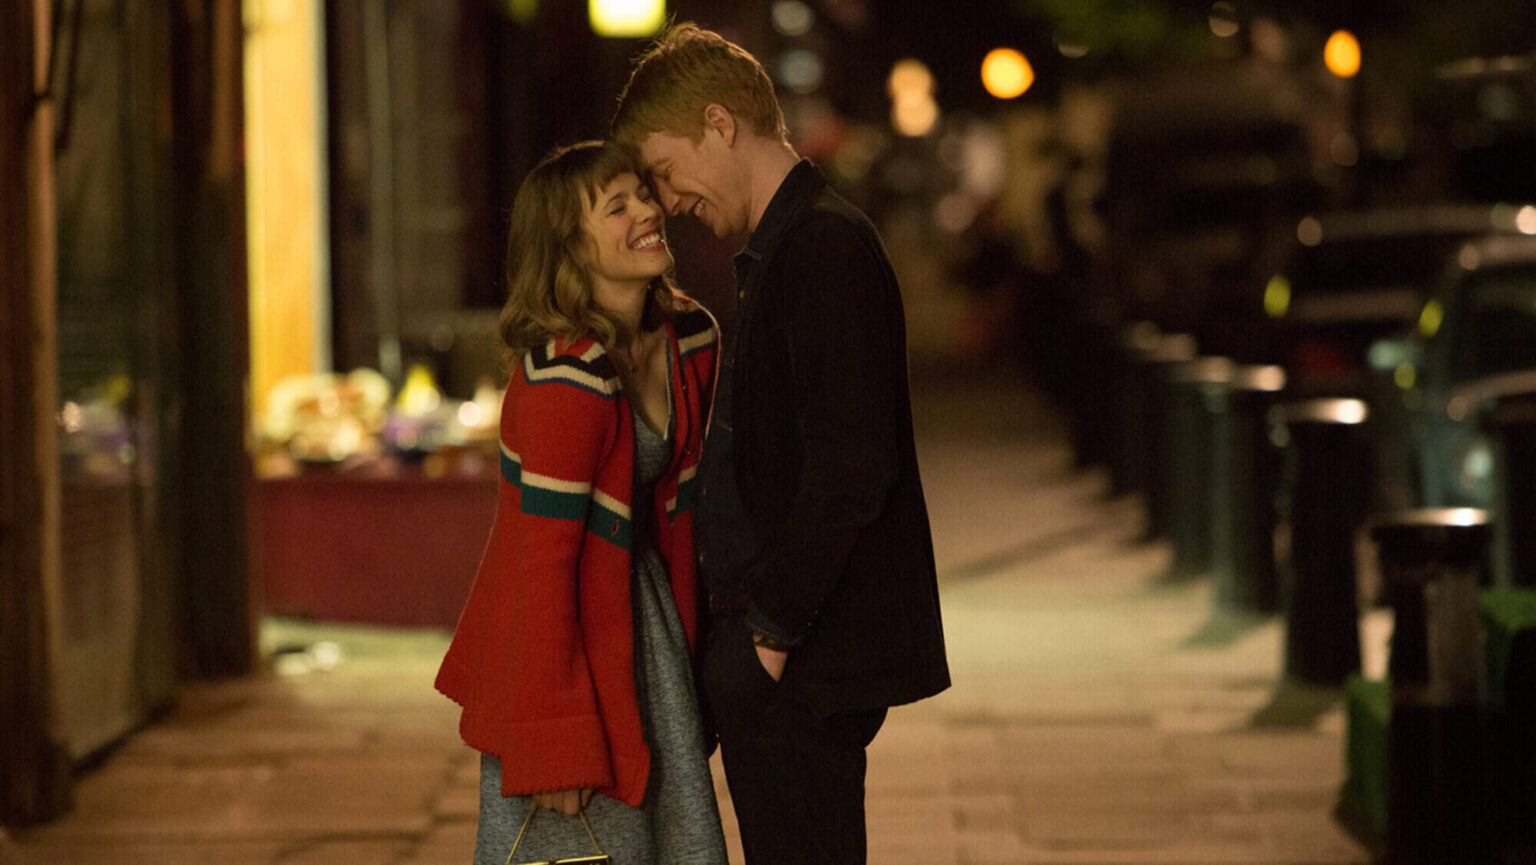 If you're a humongous fan of the movie 'About Time', then you're in for a real treat. Check out all of our favorite comfort films here and enjoy.